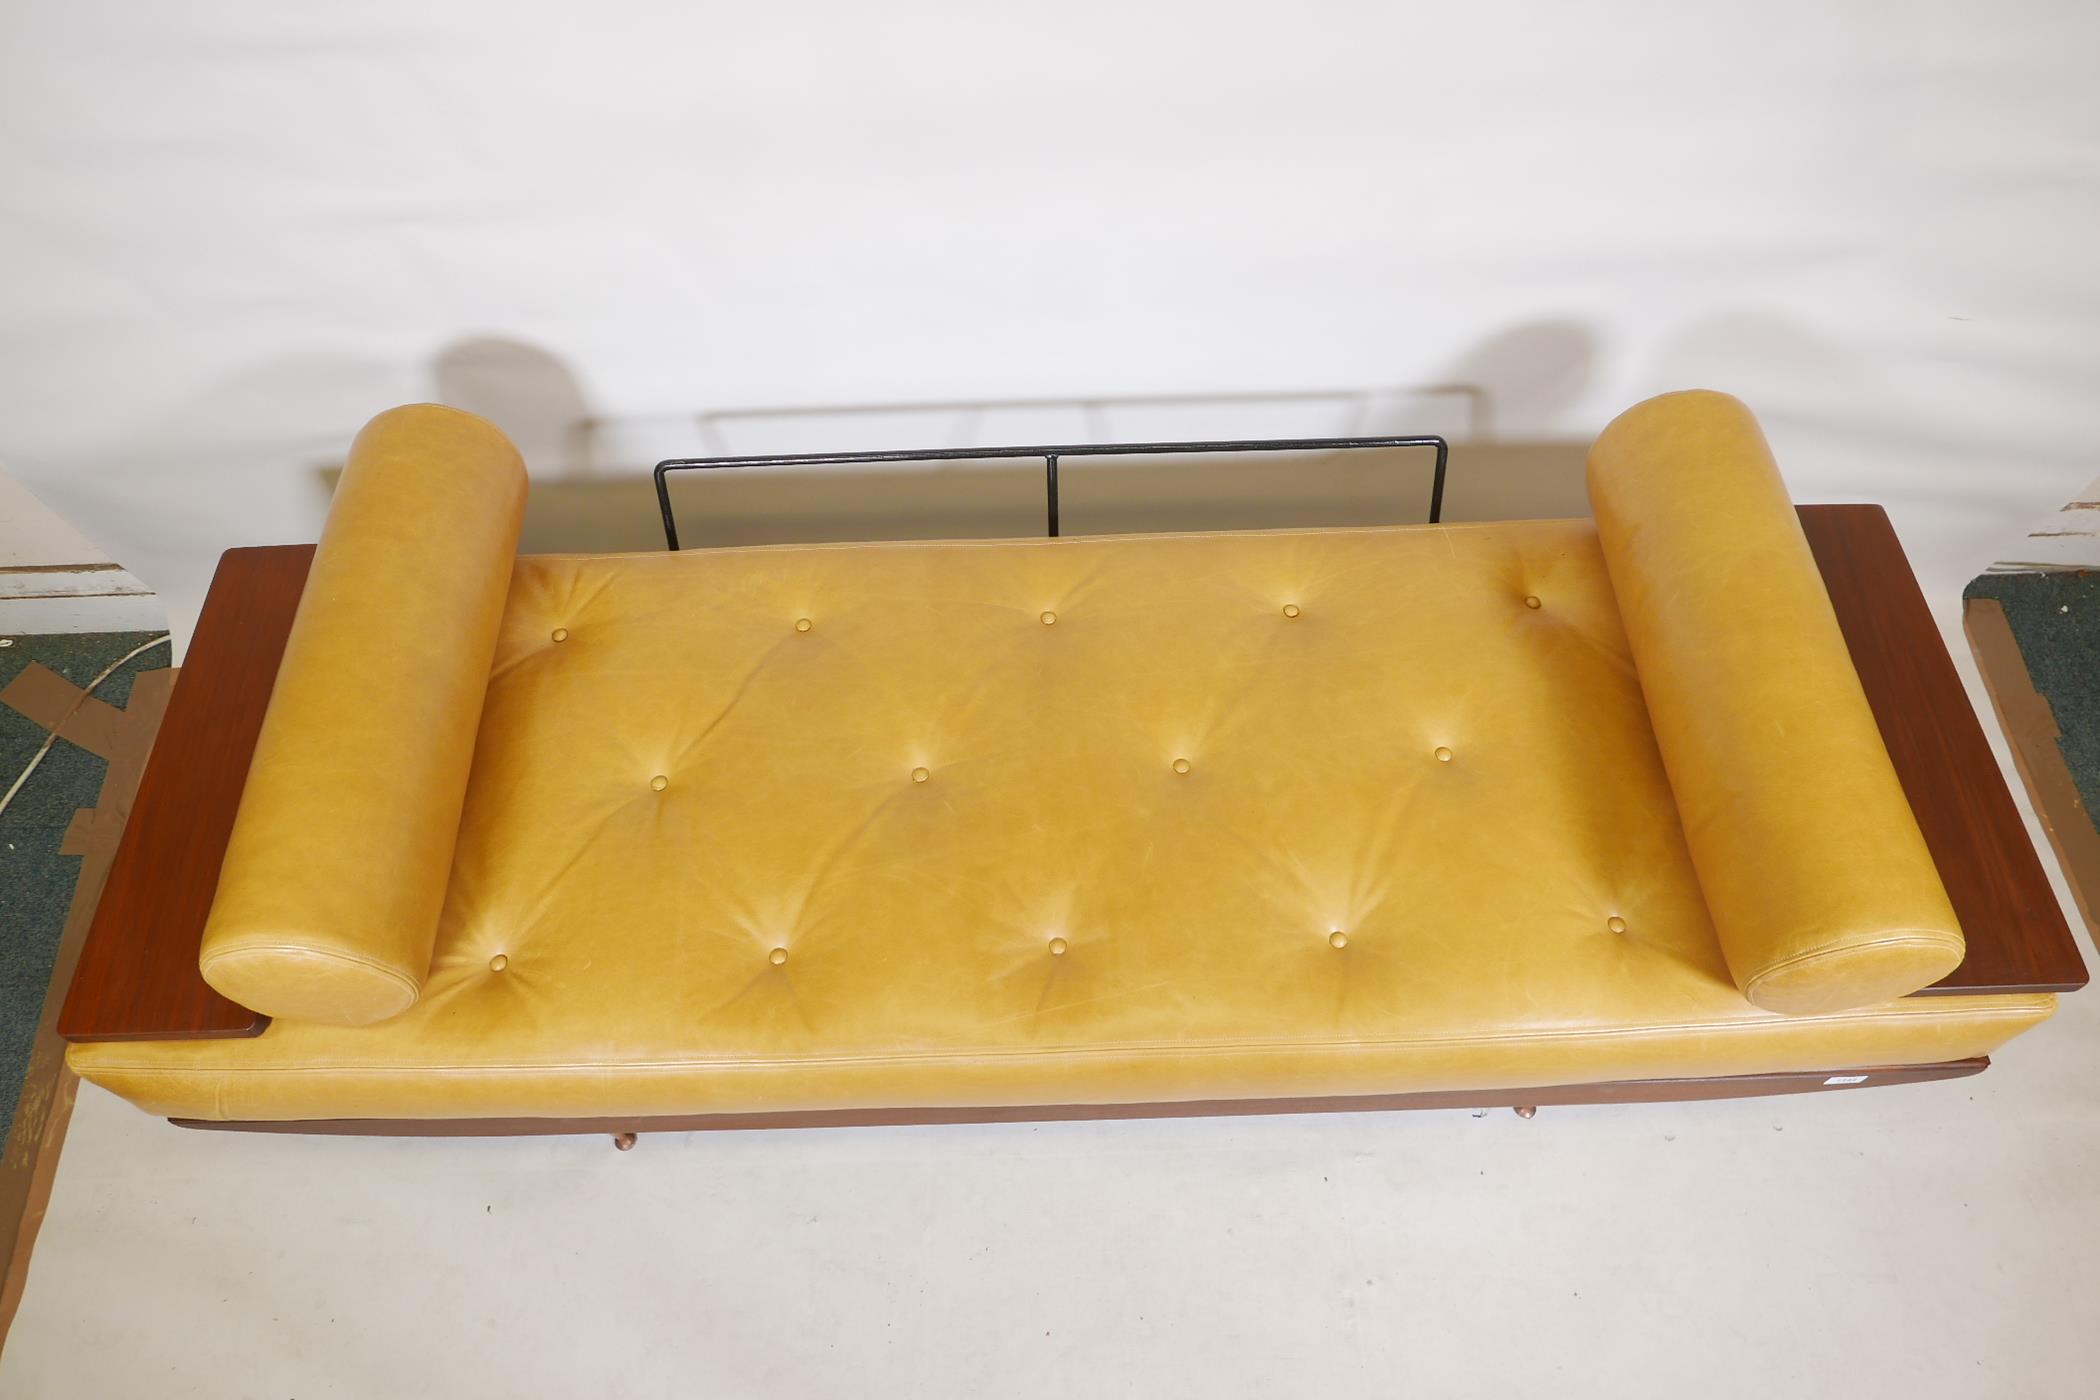 A rare 1950s British Toothill afromosia sofa bed, with buttoned mustard cushions, extending side - Image 4 of 6